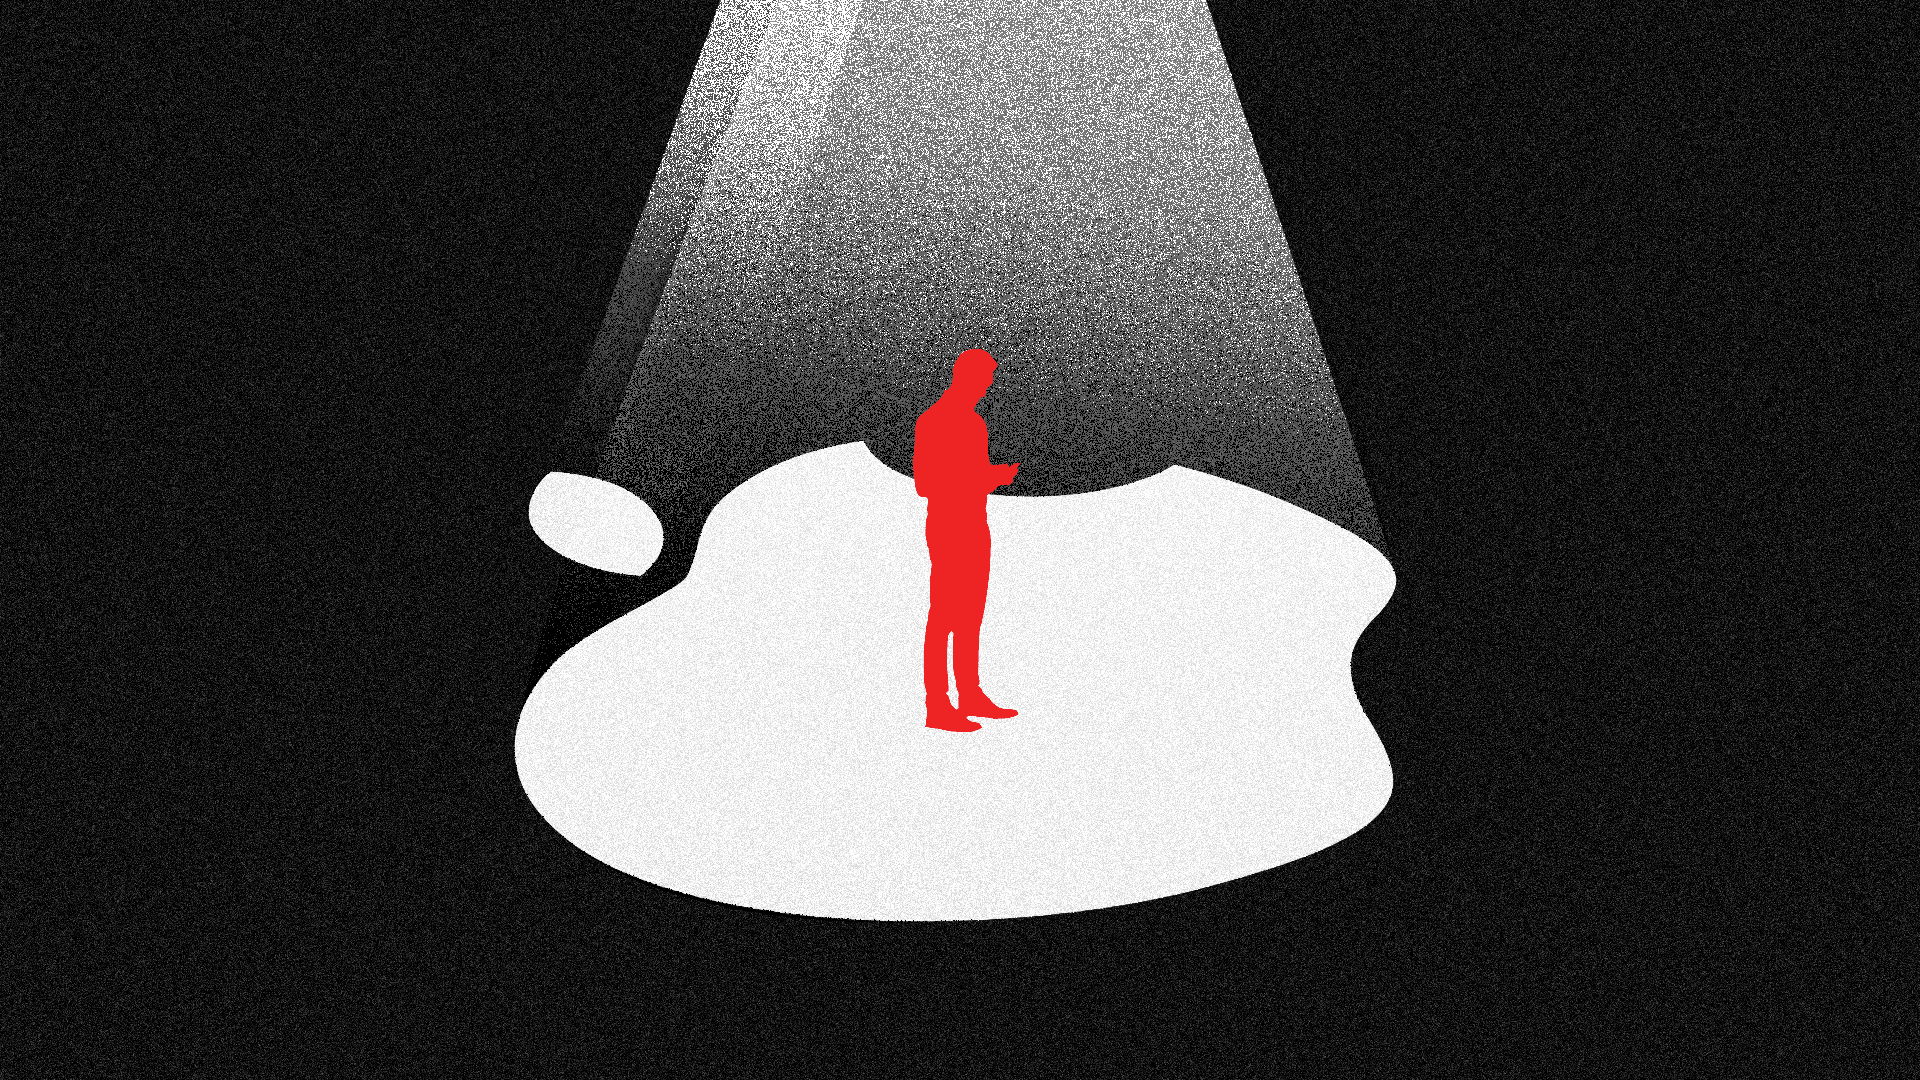 an illustration of someone standing beneath a light that's shaped like the apple logo